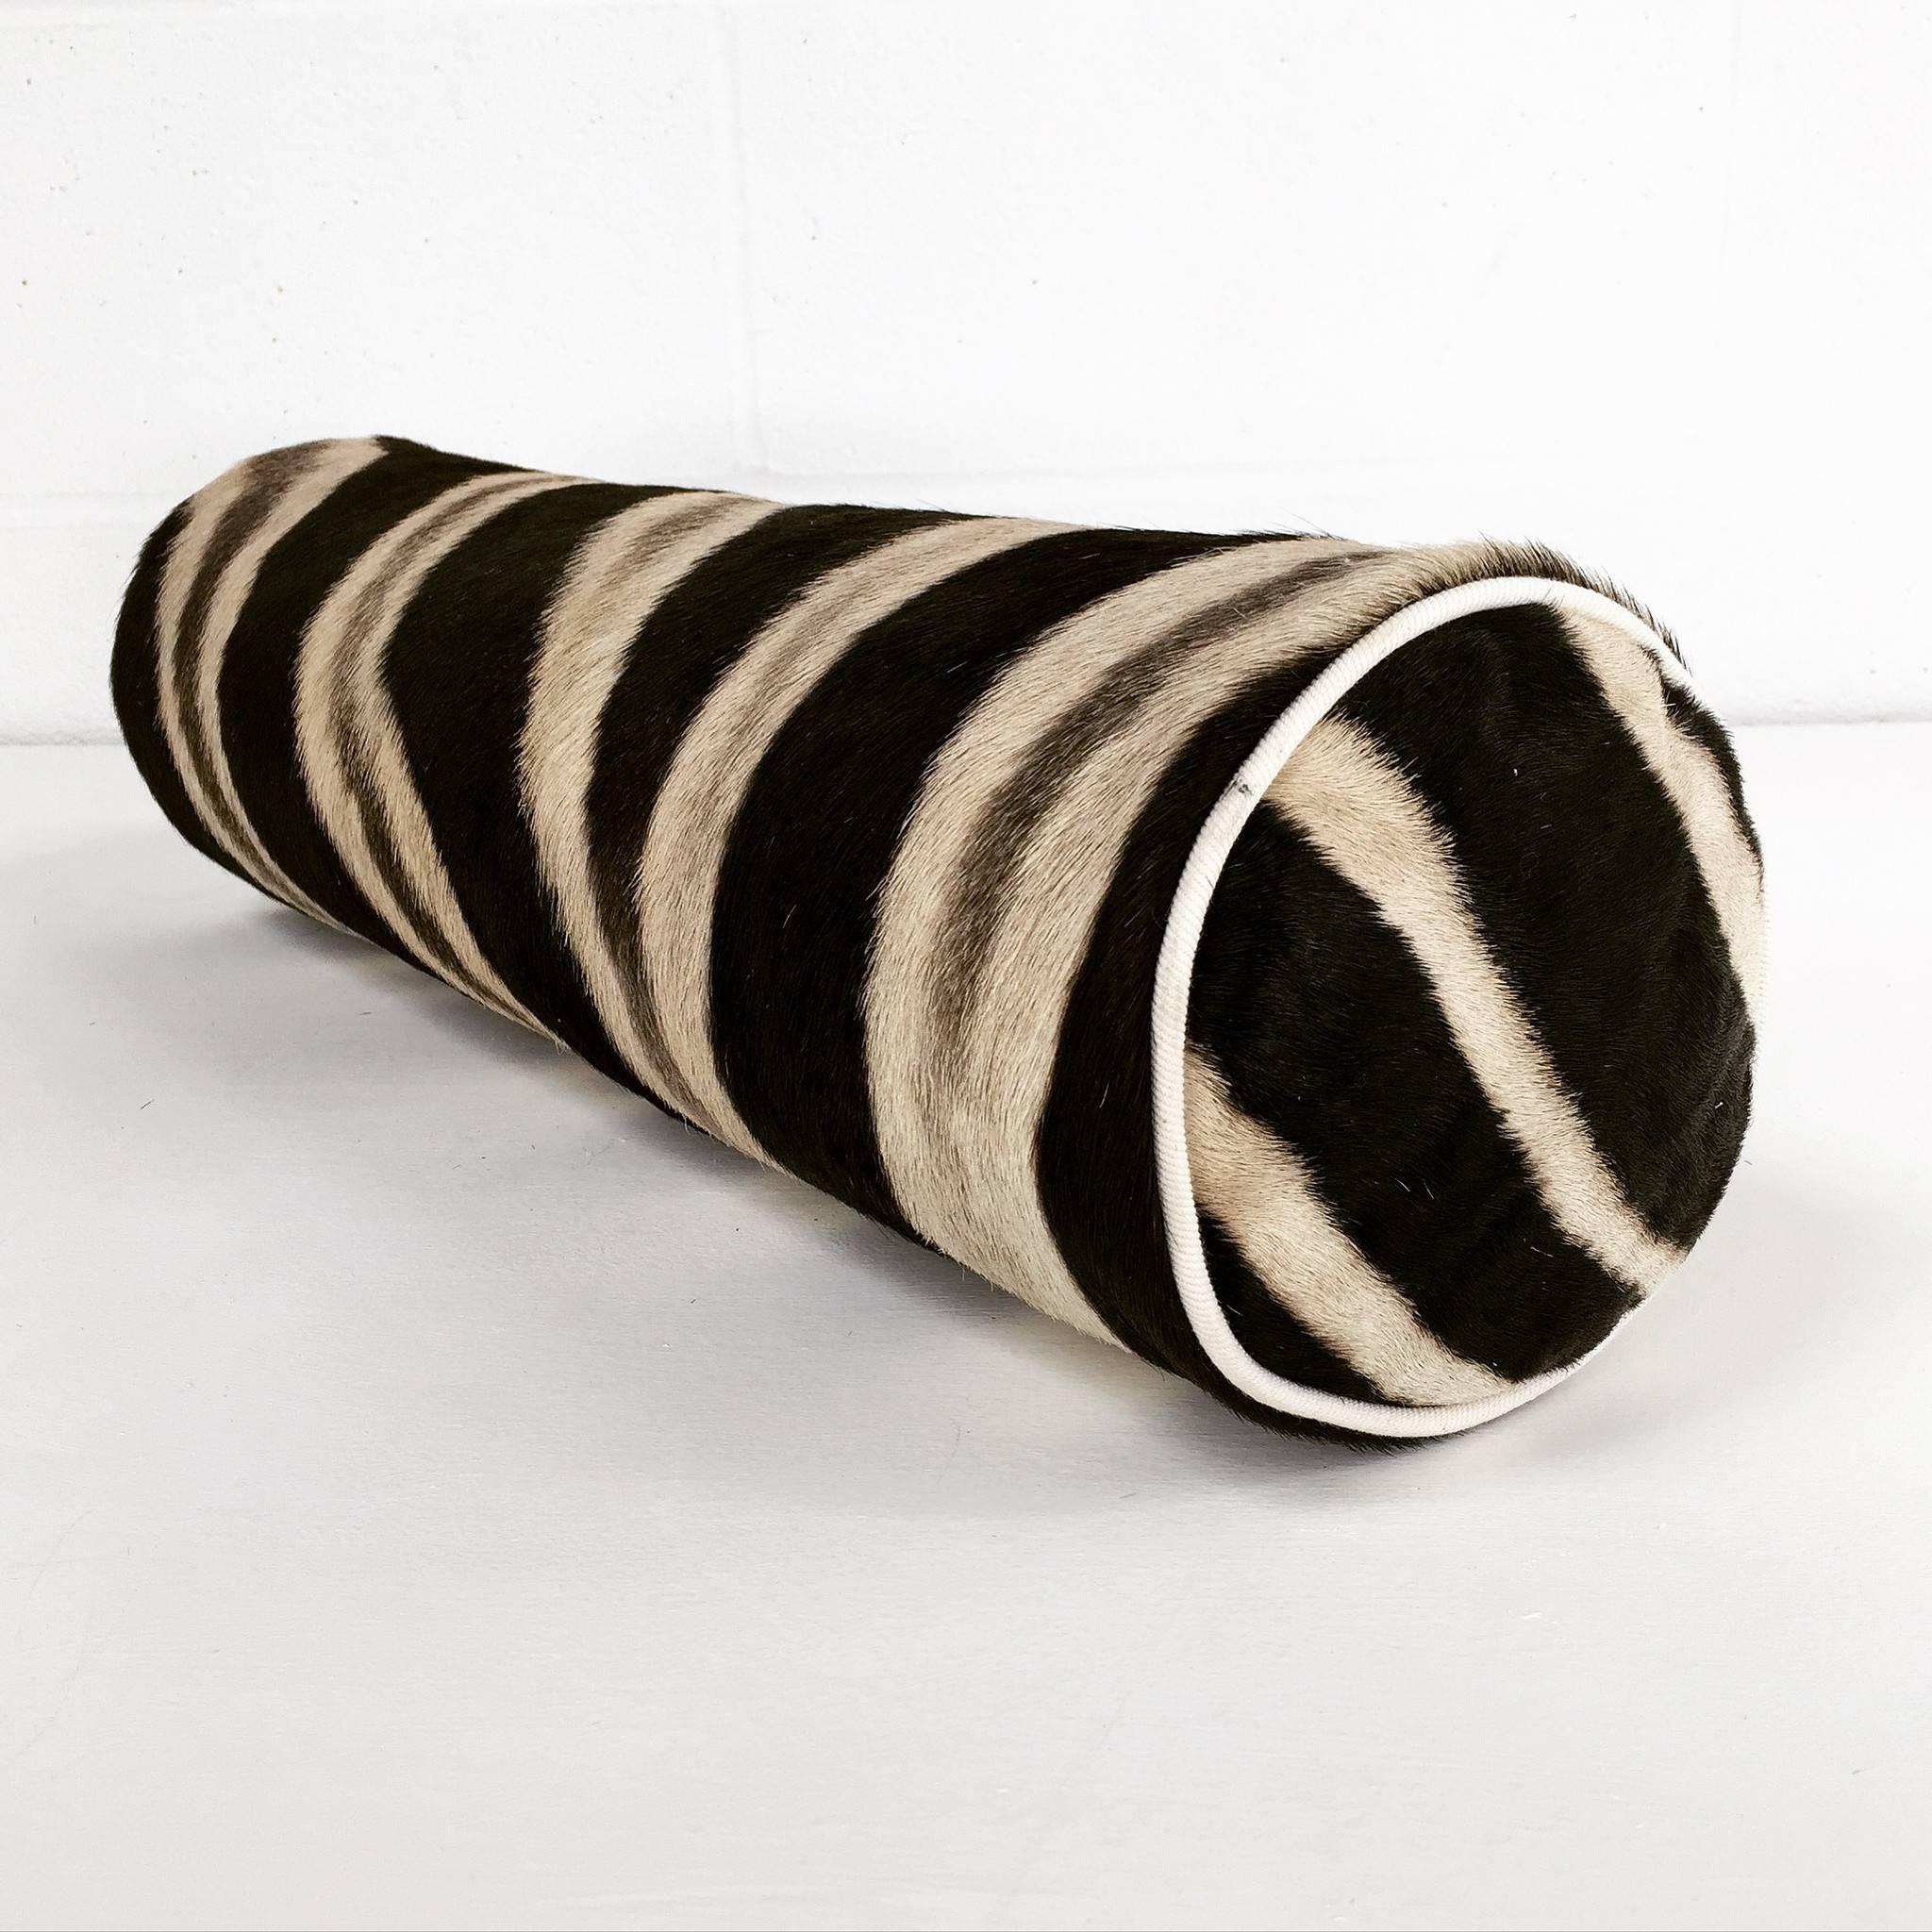 Forsyth zebra hide pillows are simply the best. The most beautiful hides are selected, hand-cut, hand-stitched and hand stuffed with the finest goose down. Each step is meticulously curated by Saint Louis based Forsyth artisans. Every pillow is a